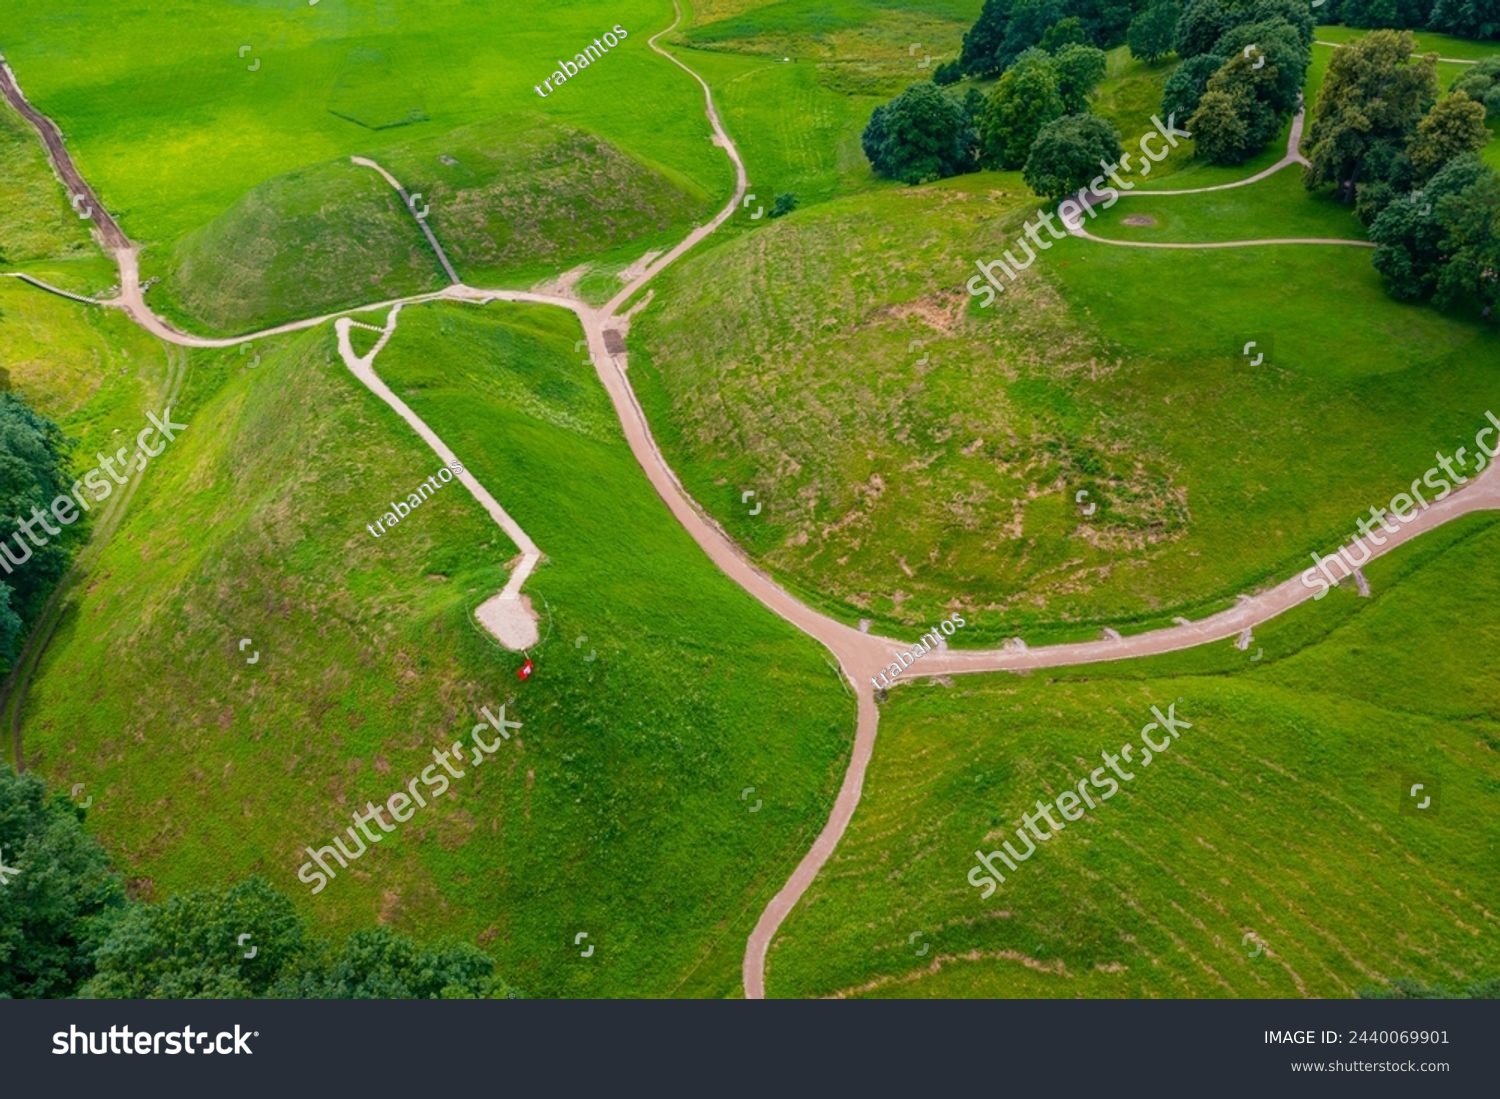 Panorama view of the Hillforts of Kernave, ancient capital of Grand Duchy of Lithuania. #2440069901